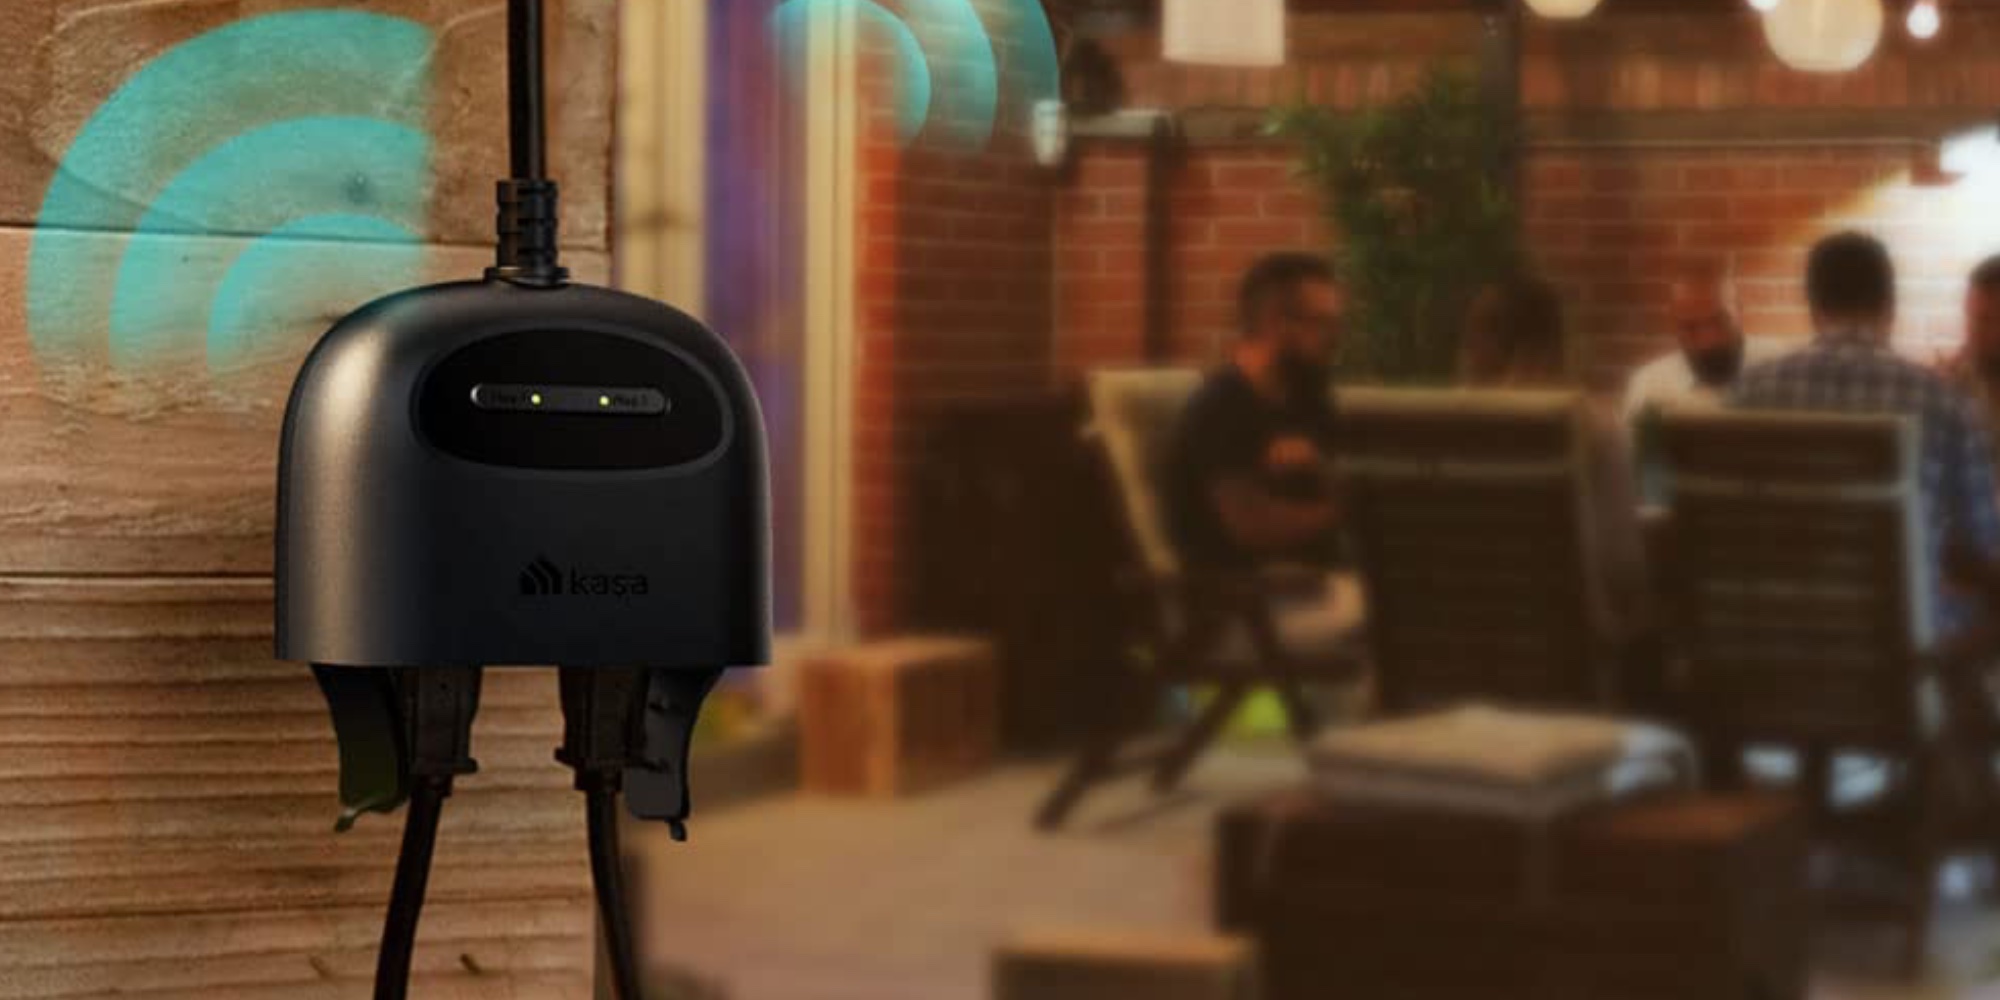 TP-Link's new Kasa Outdoor HomeKit Smart Plug lands at $22 (Reg. $30),  in-wall switches $19